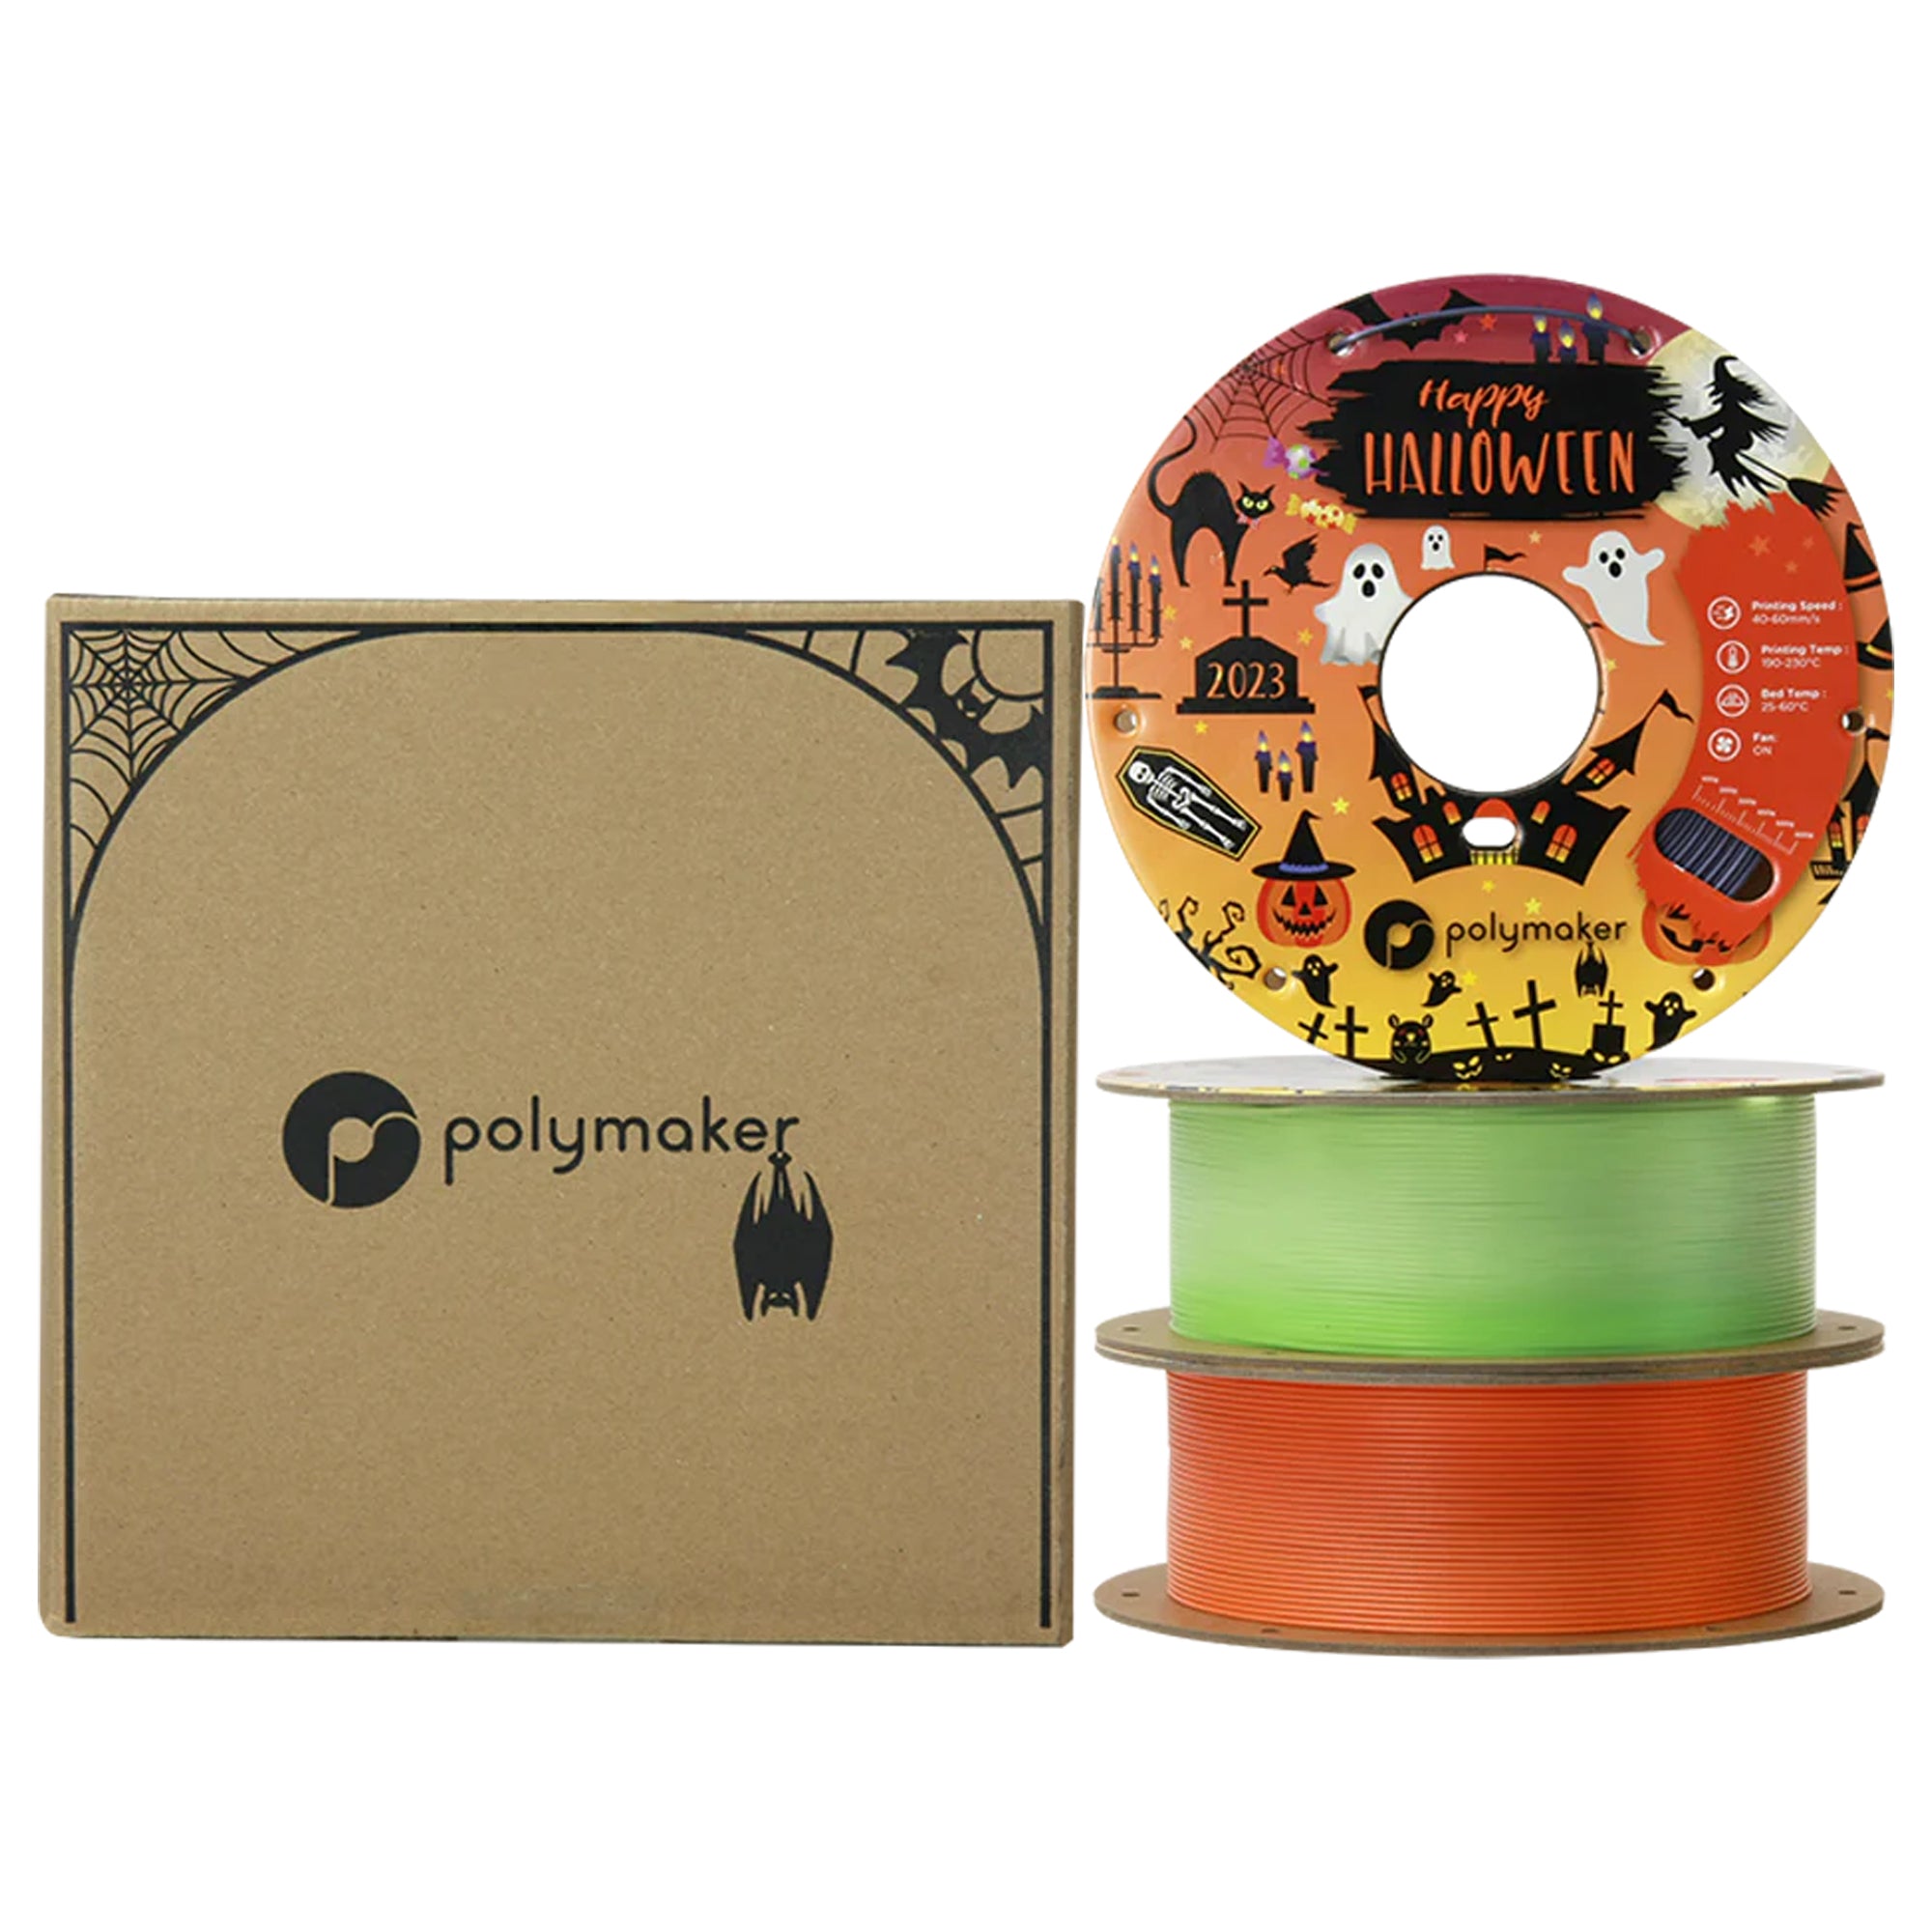 Polymaker Limited Edition Halloween Filament Pack - 3x 1kg